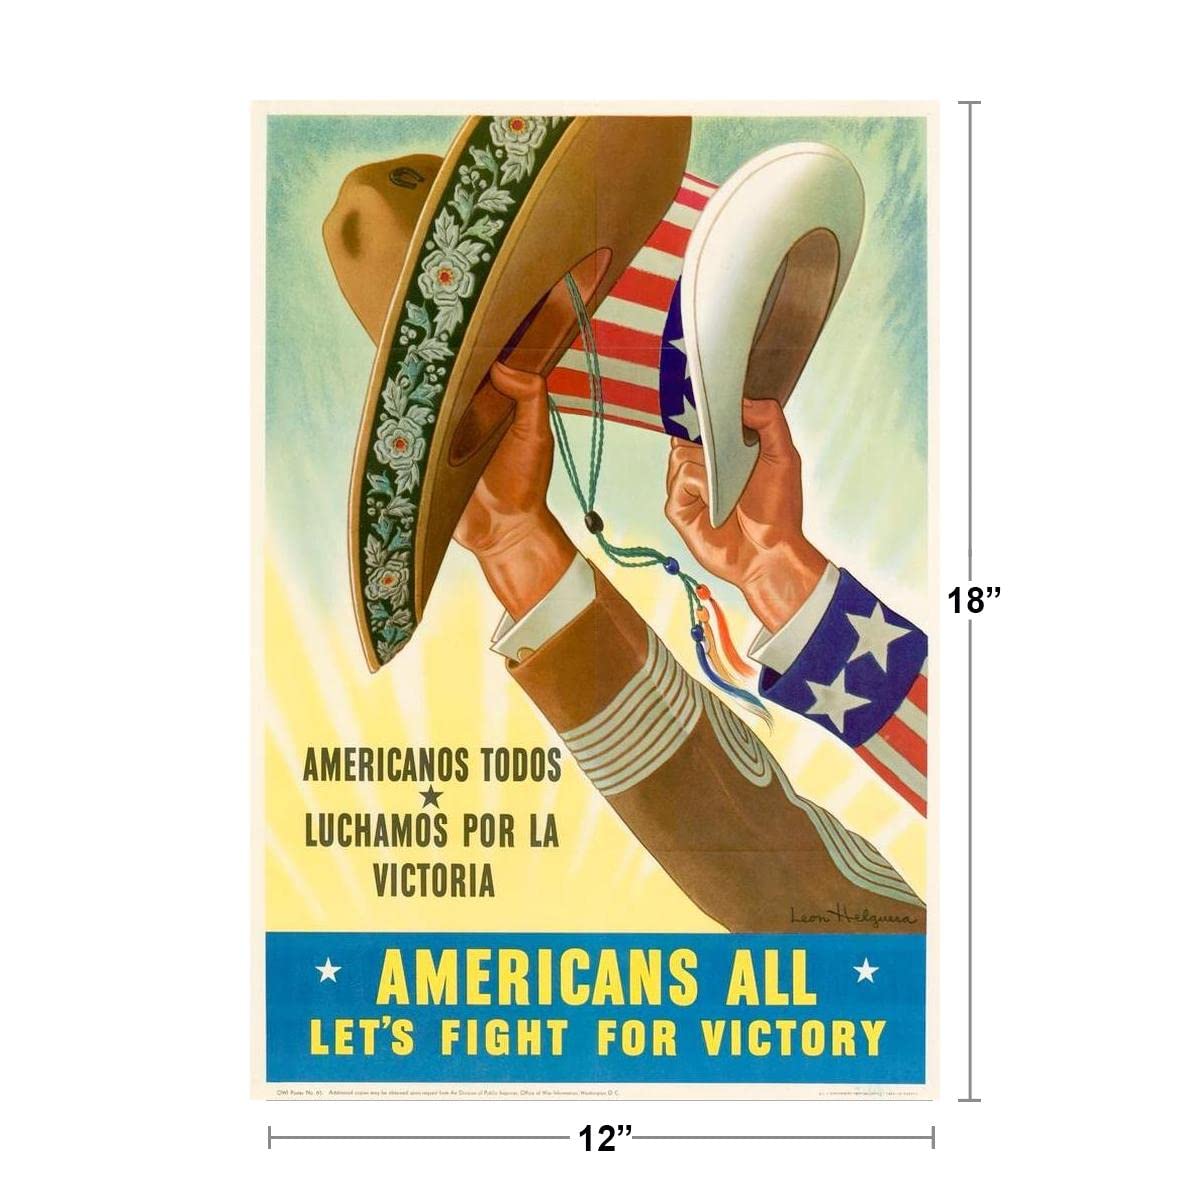 Americans All Lets Fight For Victory Americanos Todos World War II Propaganda WPA Cool Wall Decor Art Print Poster 12x18